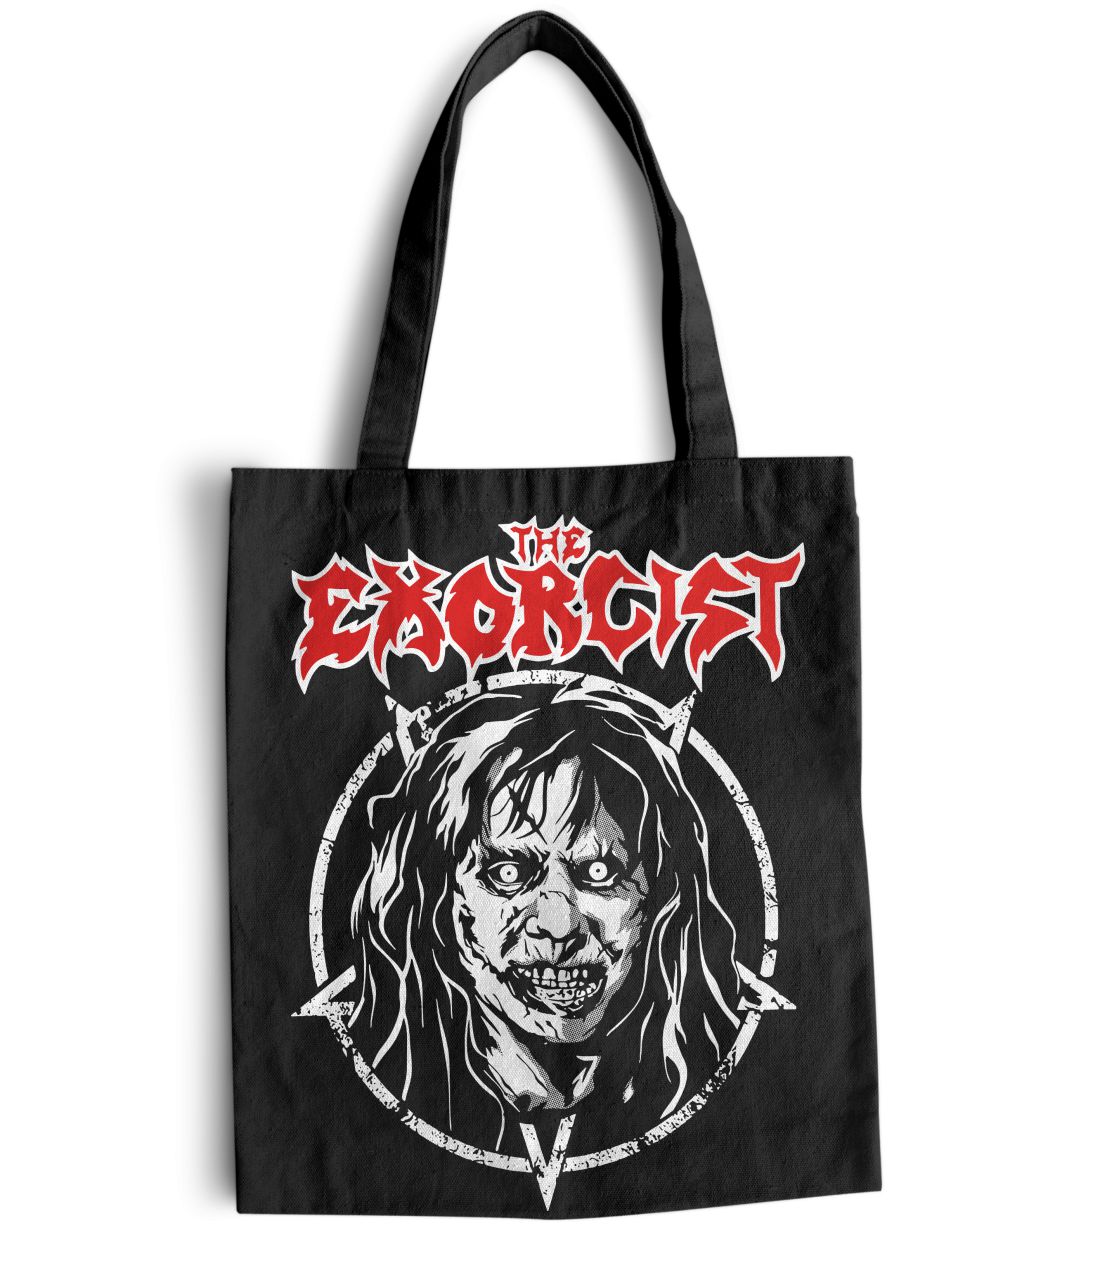 The Exorcist 001 metal series